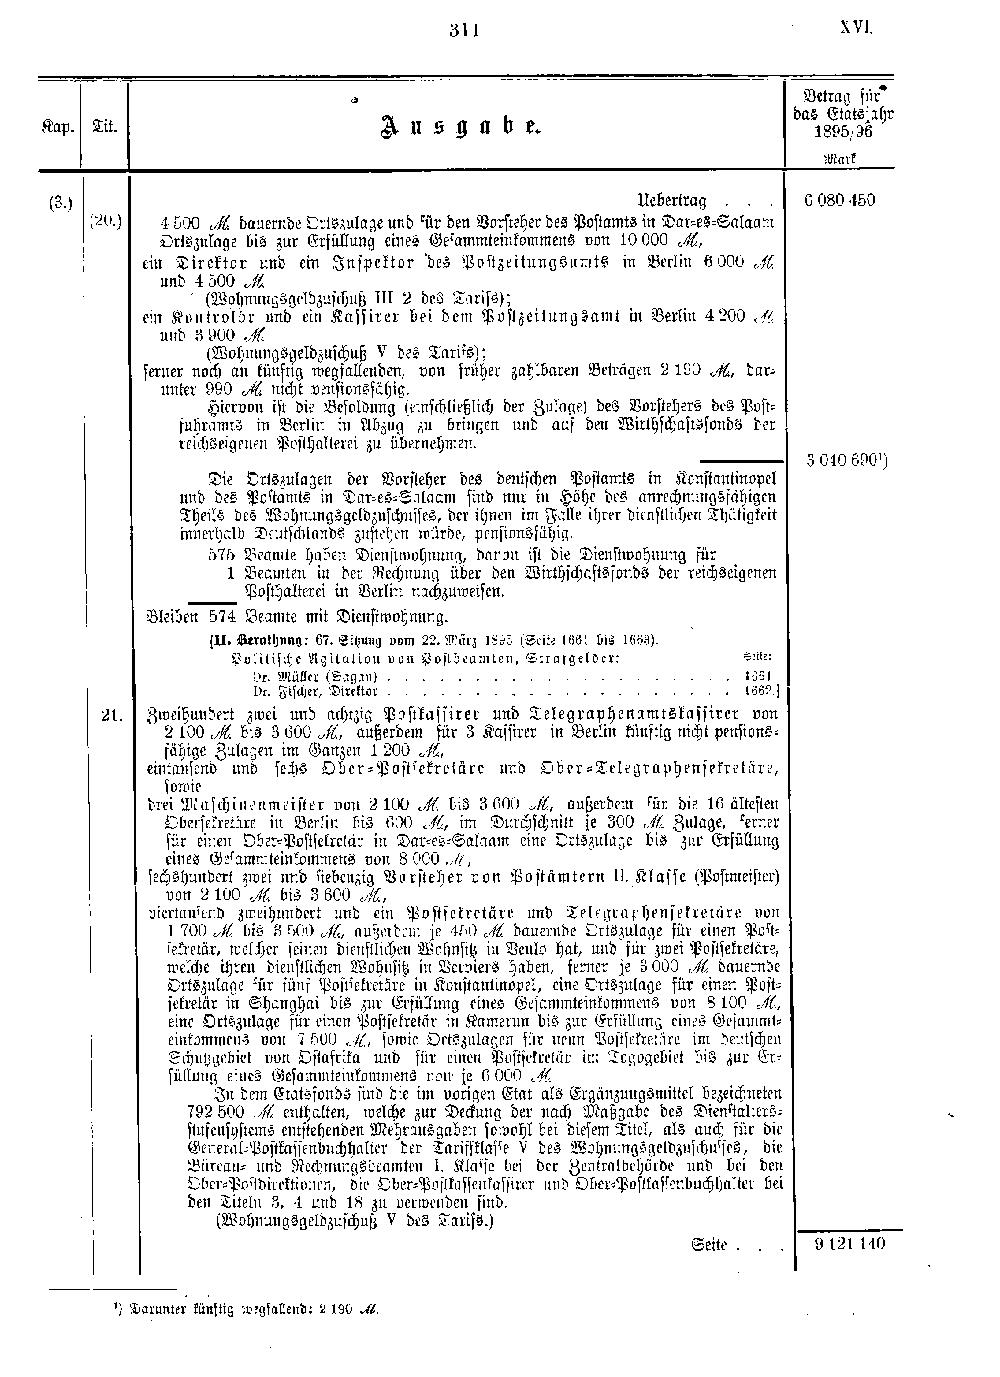 Scan of page 311